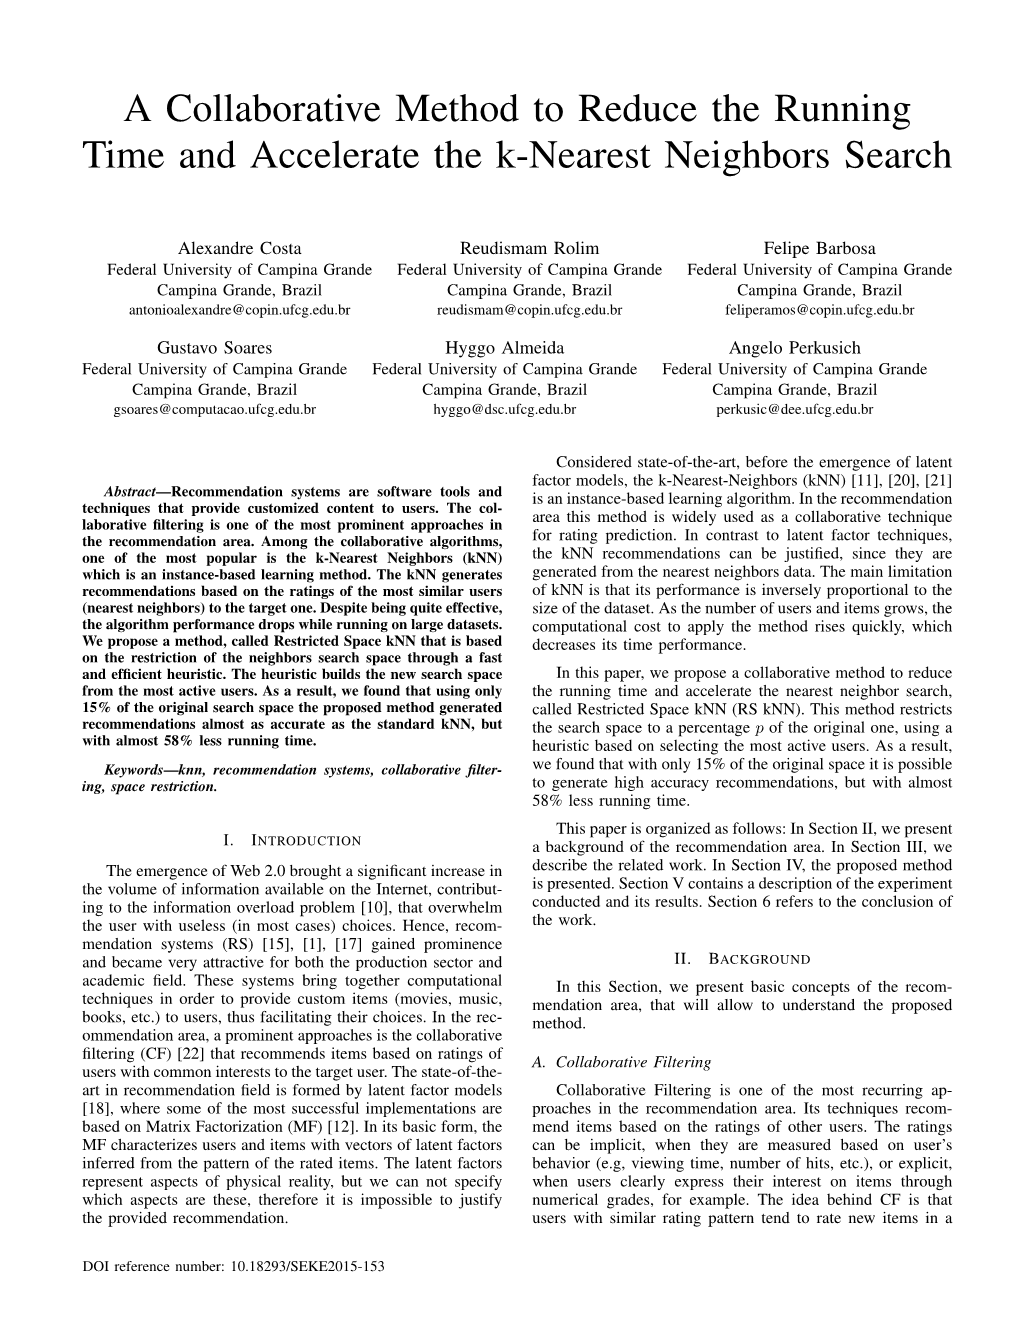 A Collaborative Method to Reduce the Running Time and Accelerate the K-Nearest Neighbors Search